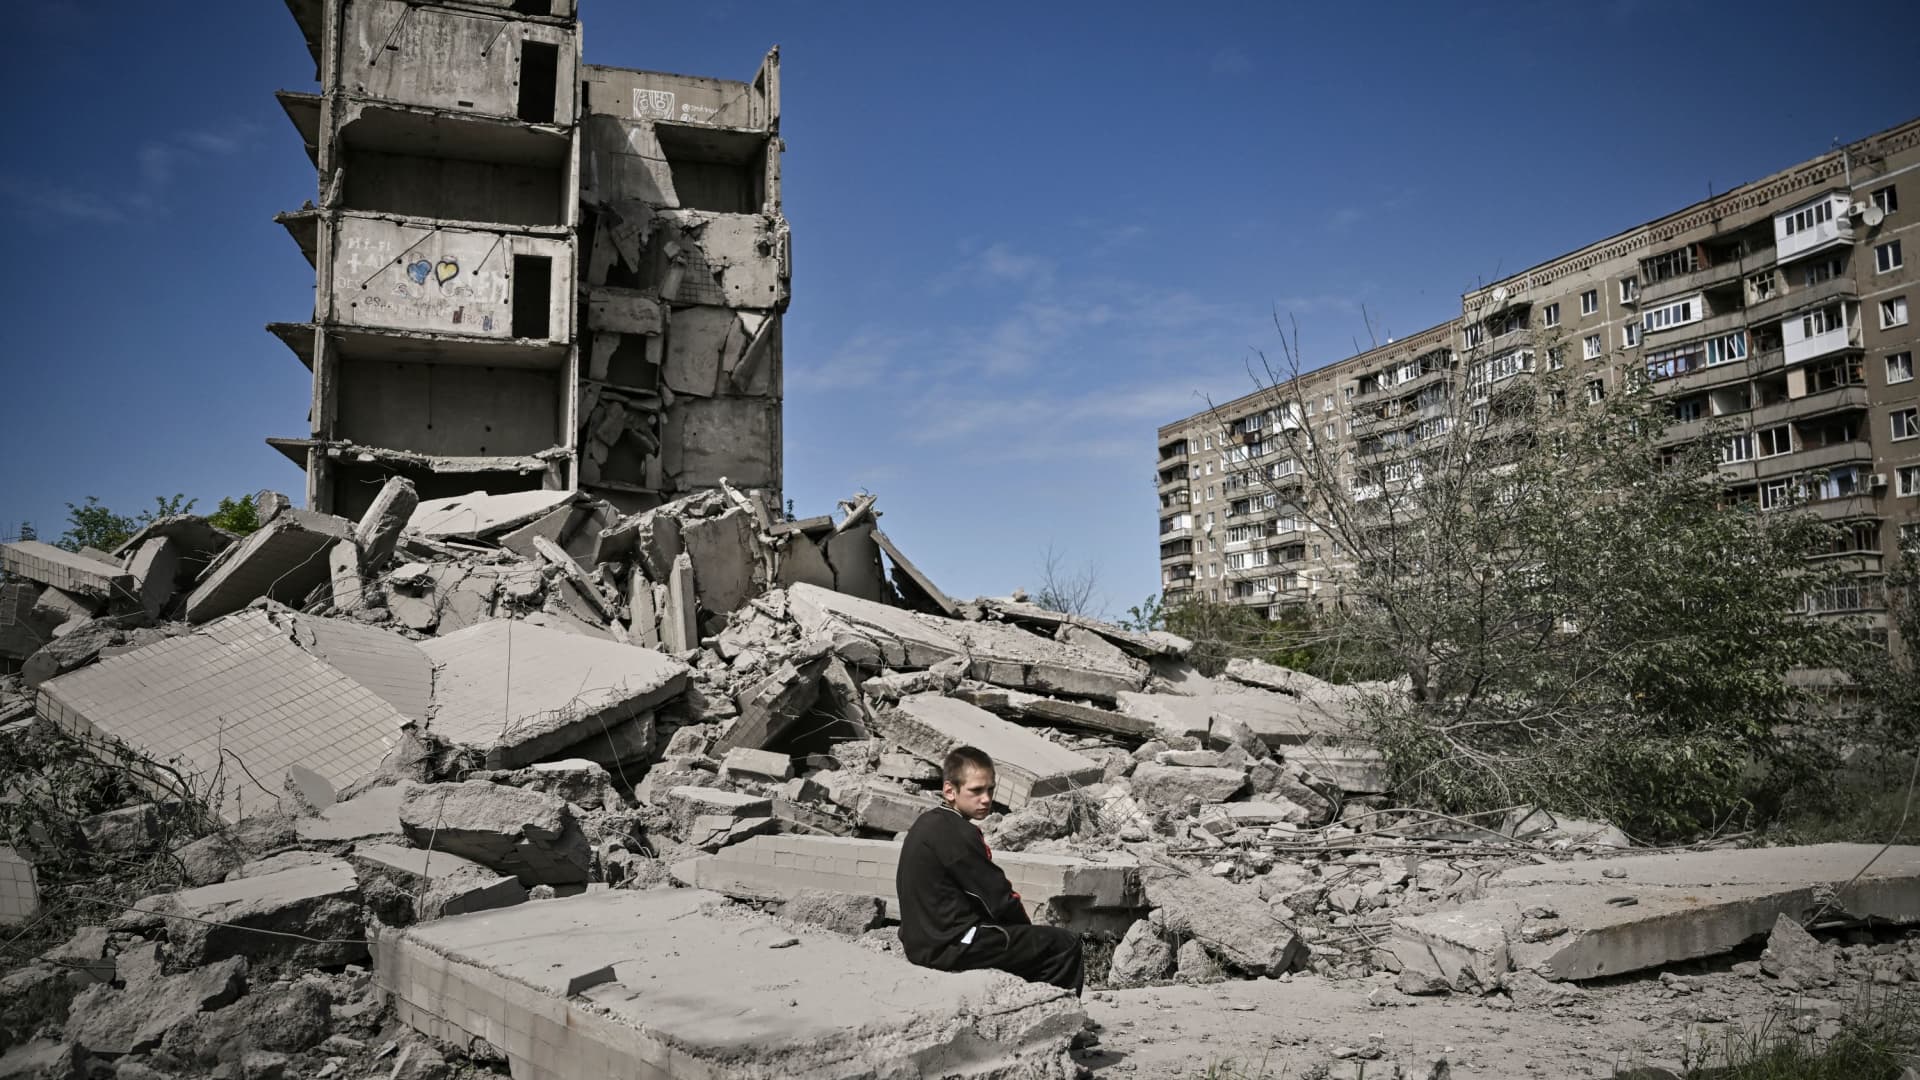 A young boy sits in front of a damaged building after a strike in Donbas, Ukraine, on May 25, 2022. More than 200,000 Ukrainian children have been deported to Russia, President Volodymyr Zelenskyy said in his nightly address.